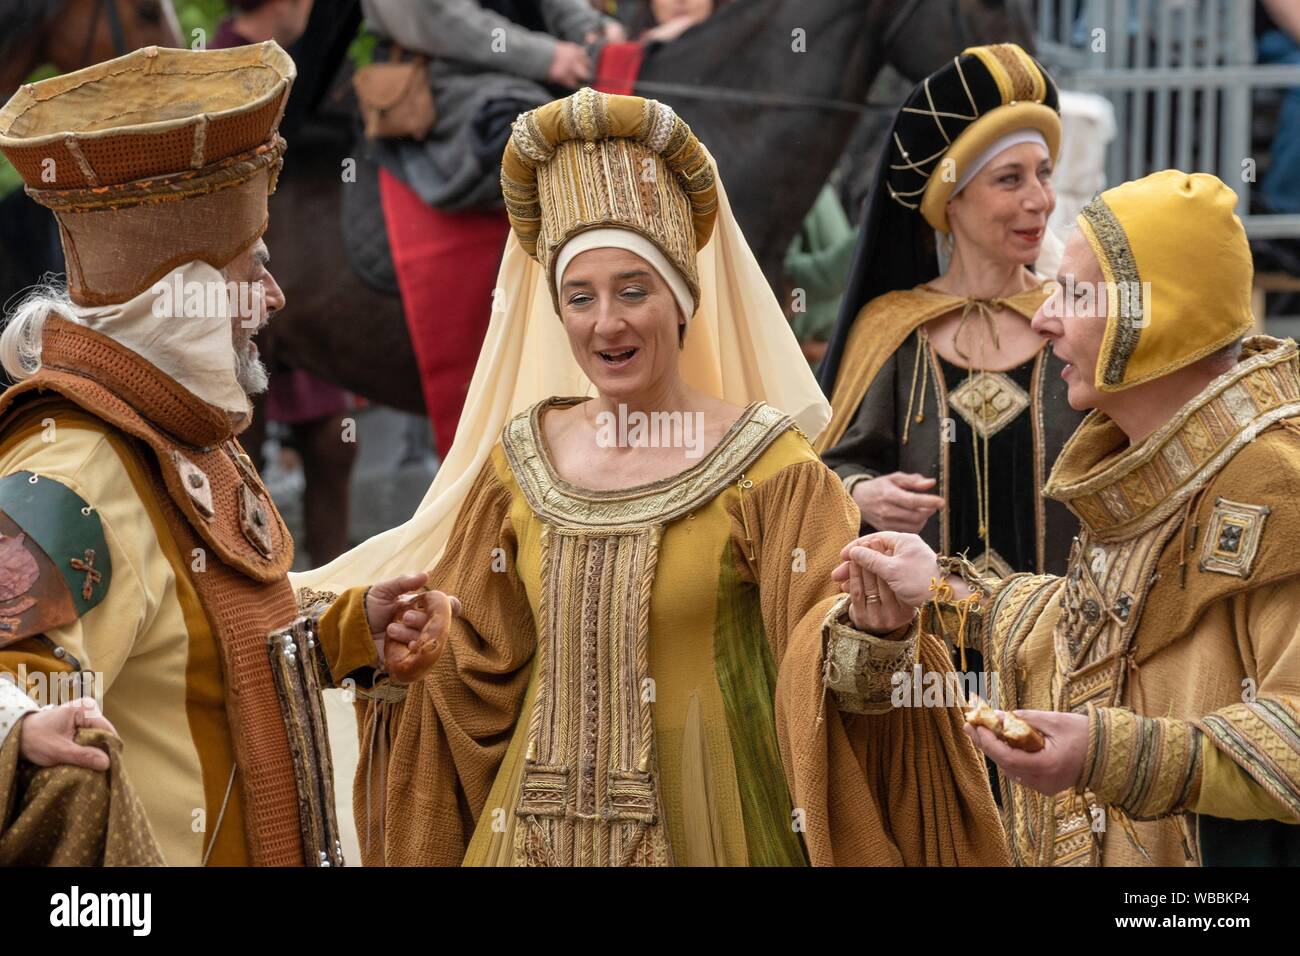 Calendimaggio Festival Pageant Performers Assisi Umbria Italy World Location. Stock Photo